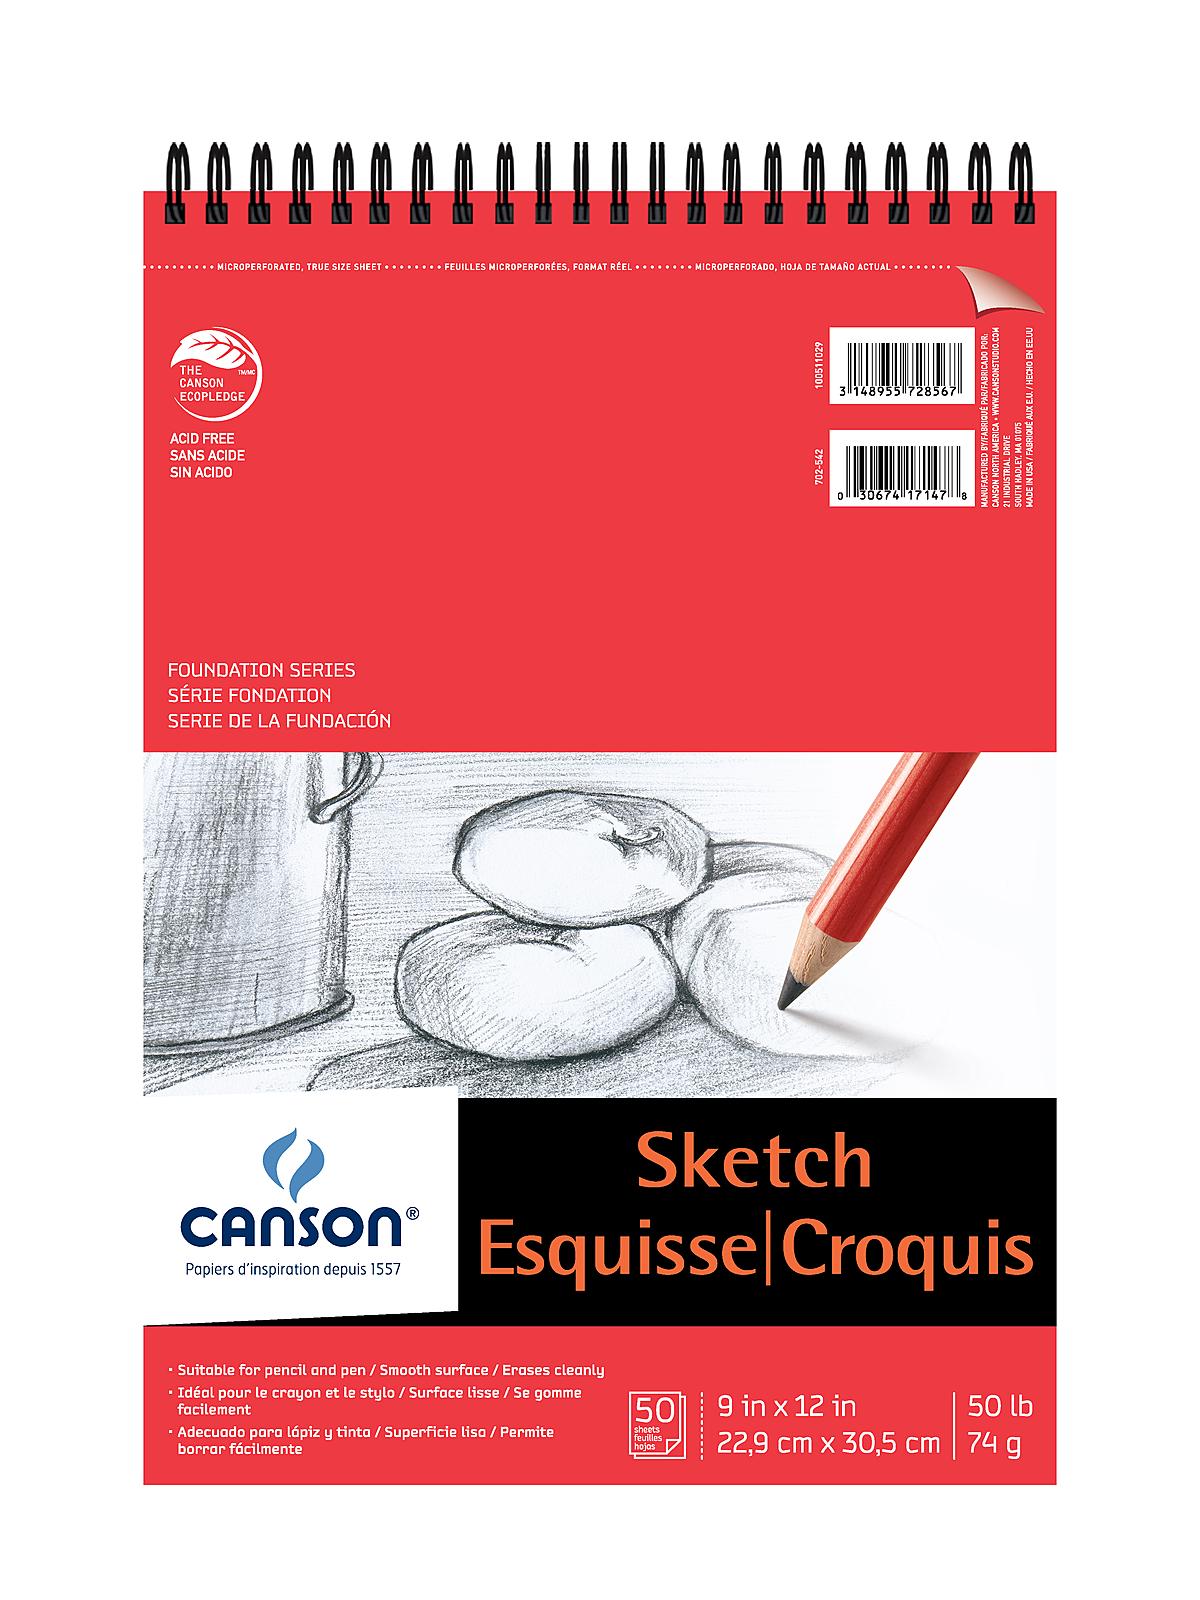 Foundation Sketch Pads 9 In. X 12 In. 50 Sheets